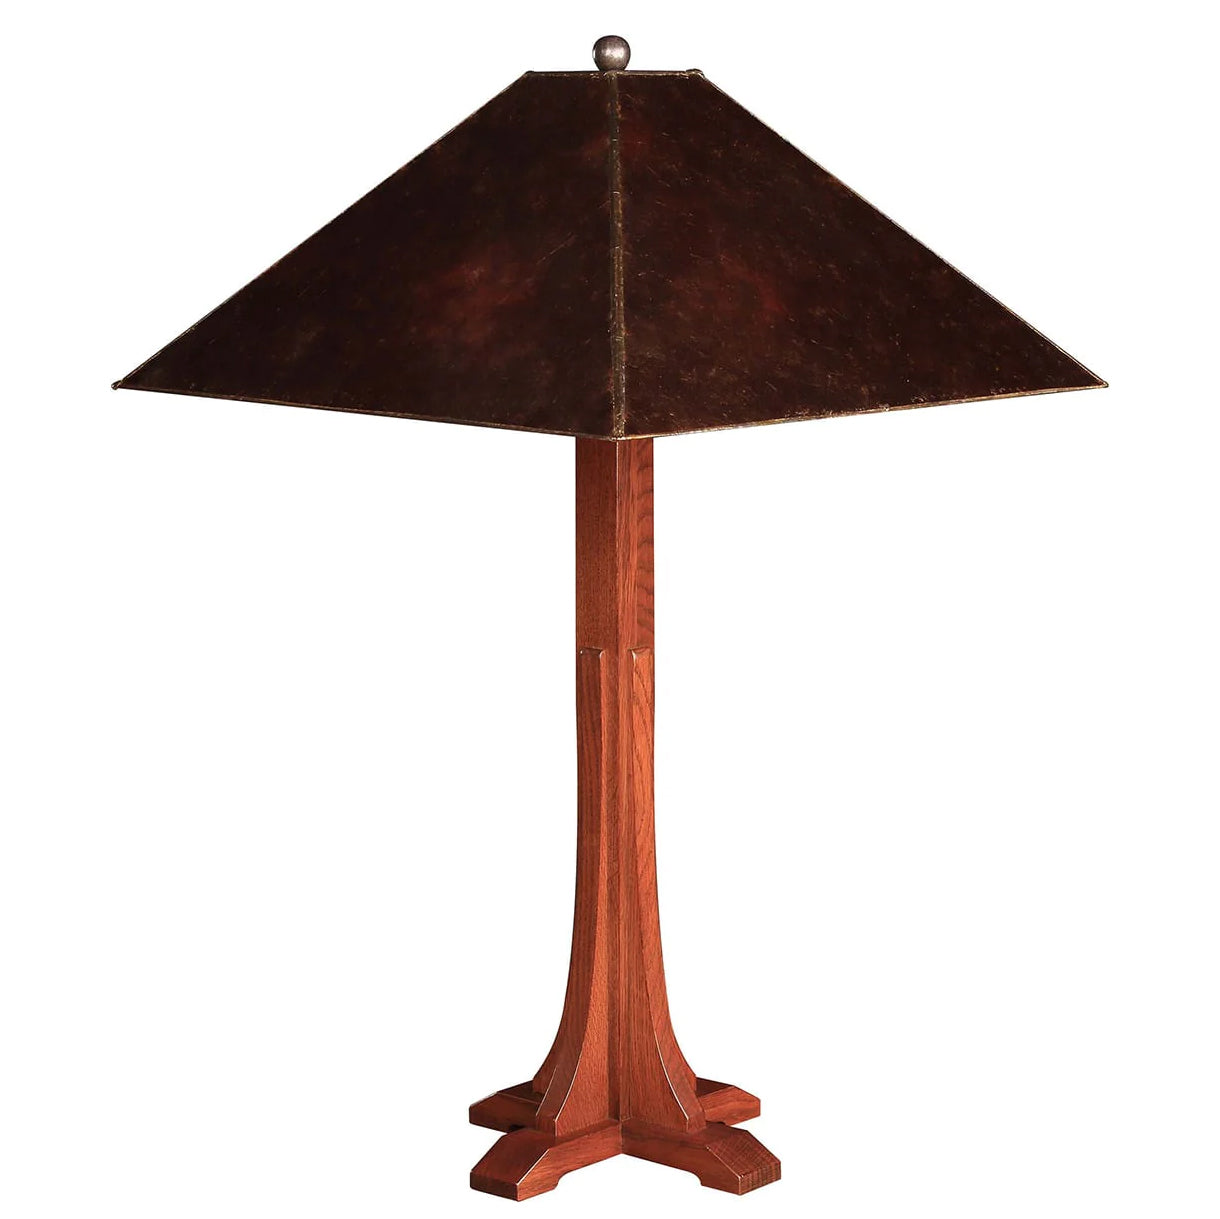 Stickley Mica Shade Cross Base Table Lamp